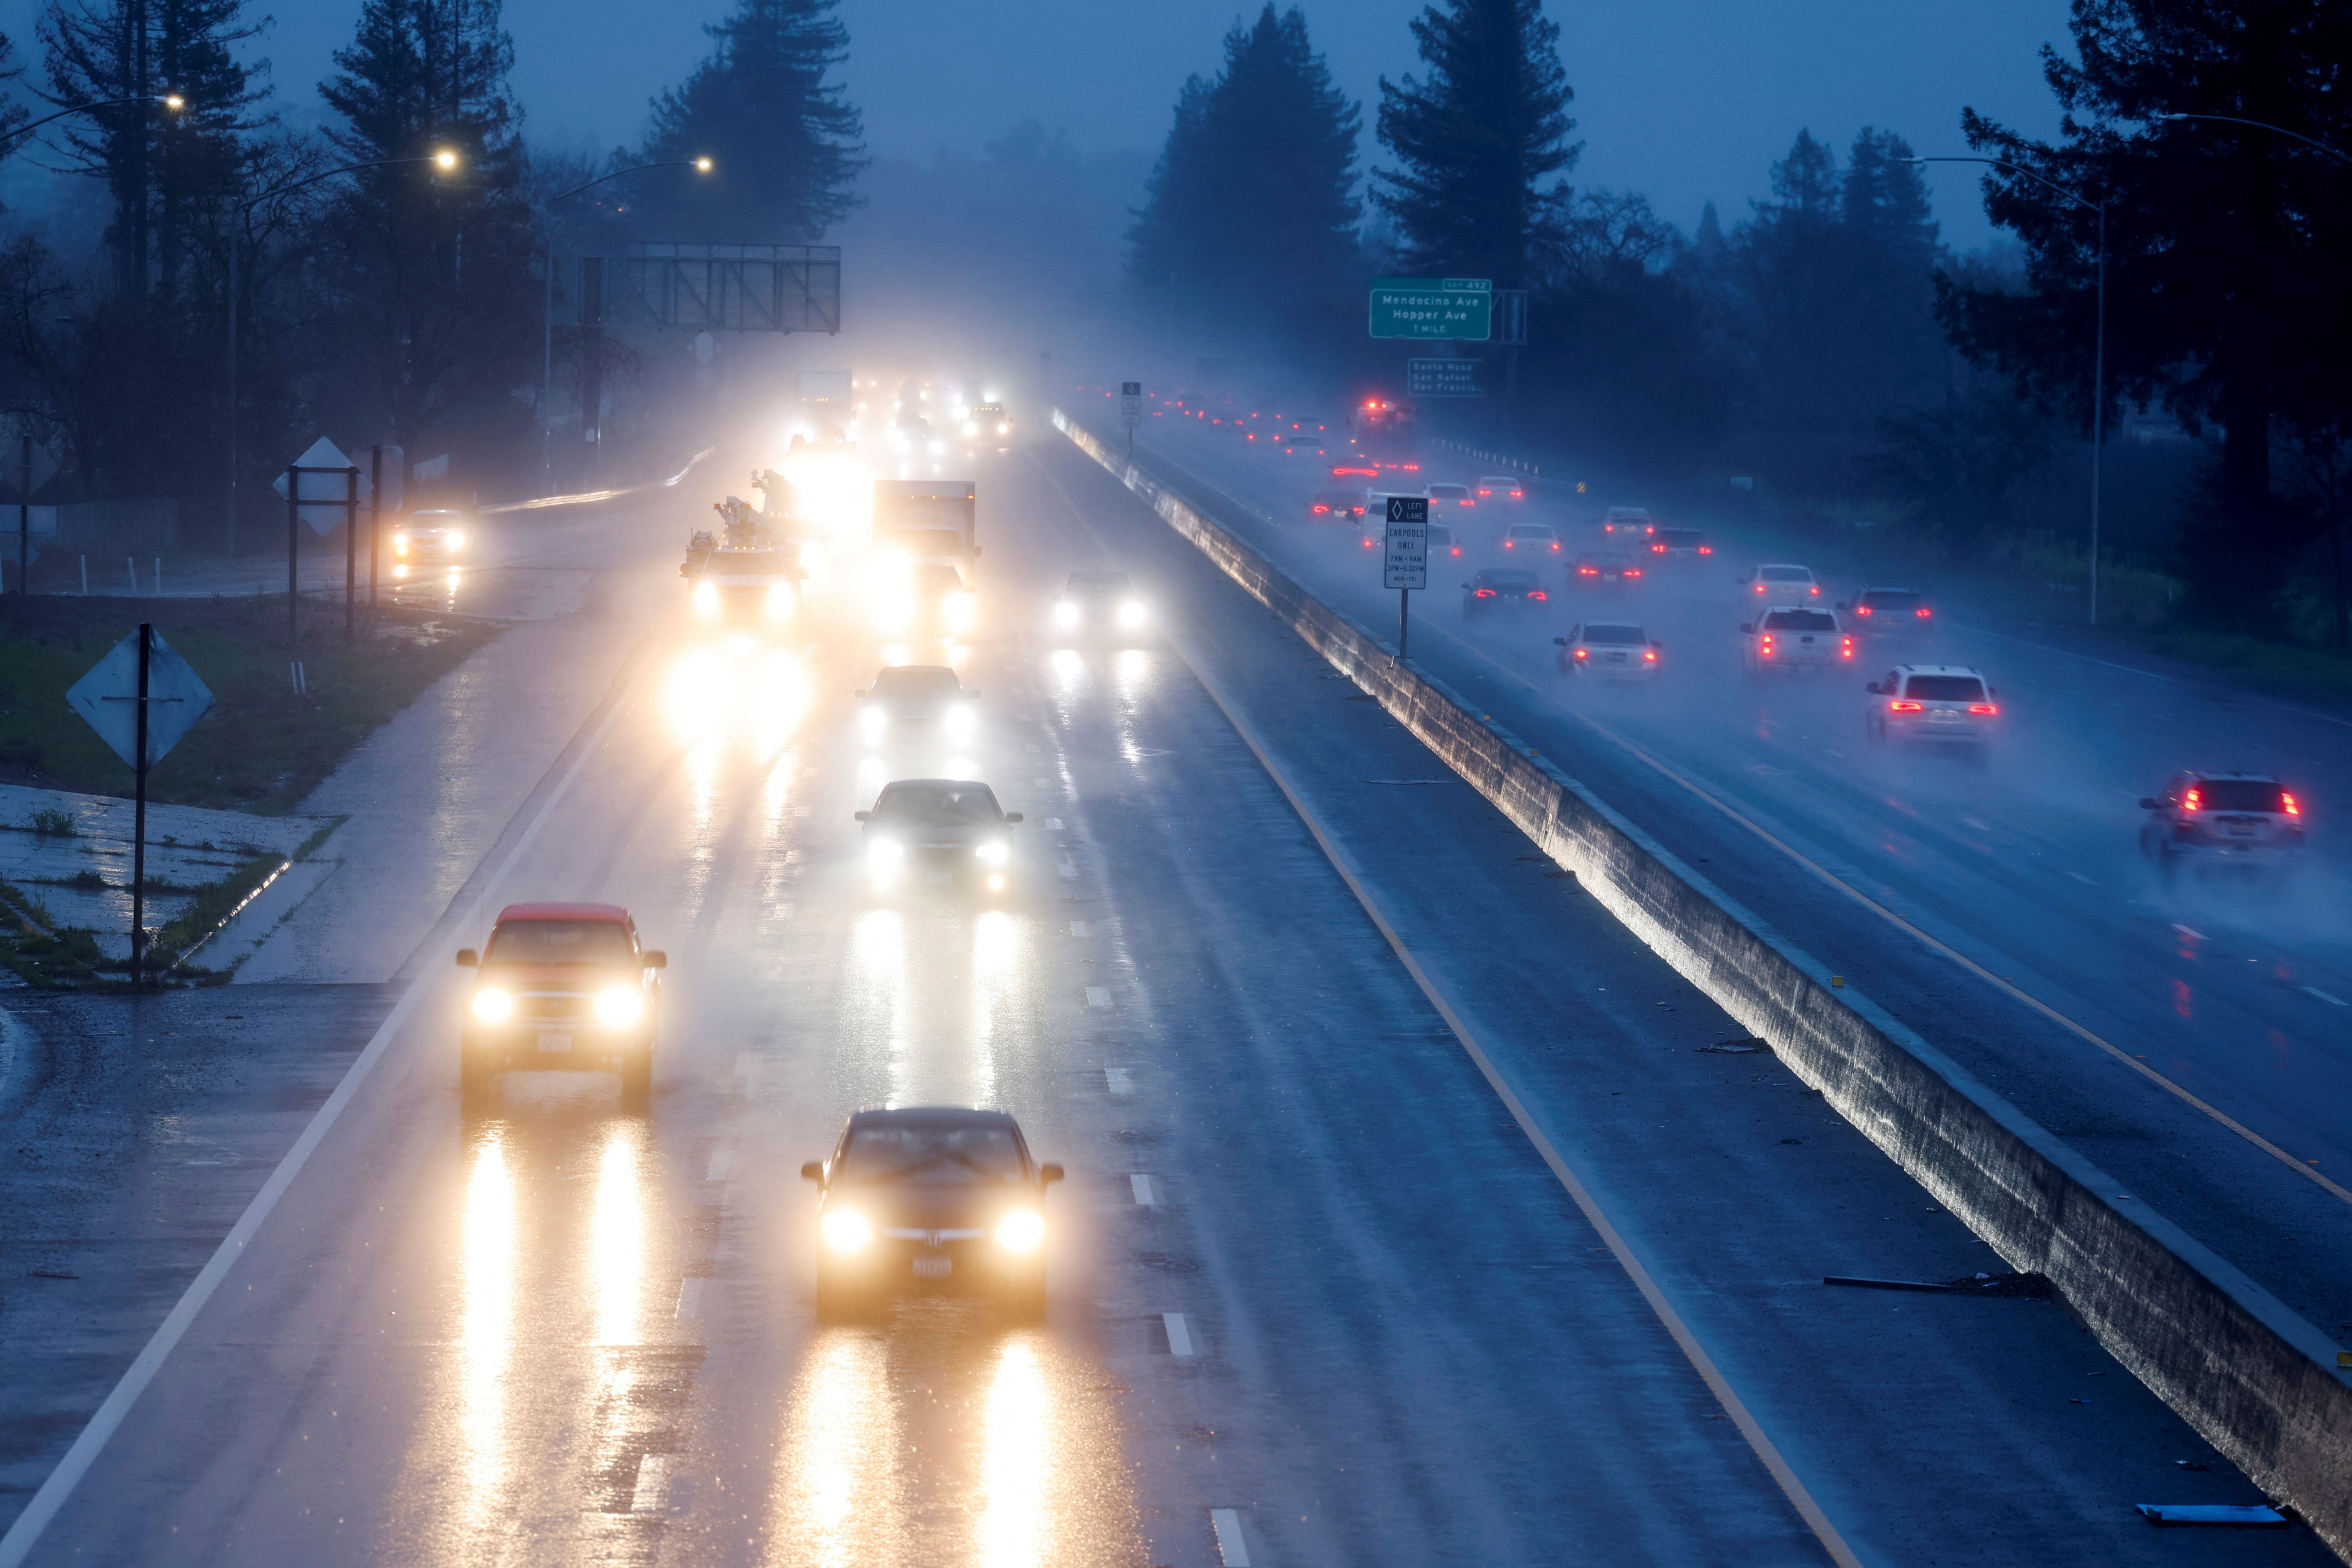 Vehicles drive in heavy rain on Highway 101 during a winter storm in Santa Rosa, California, USA.